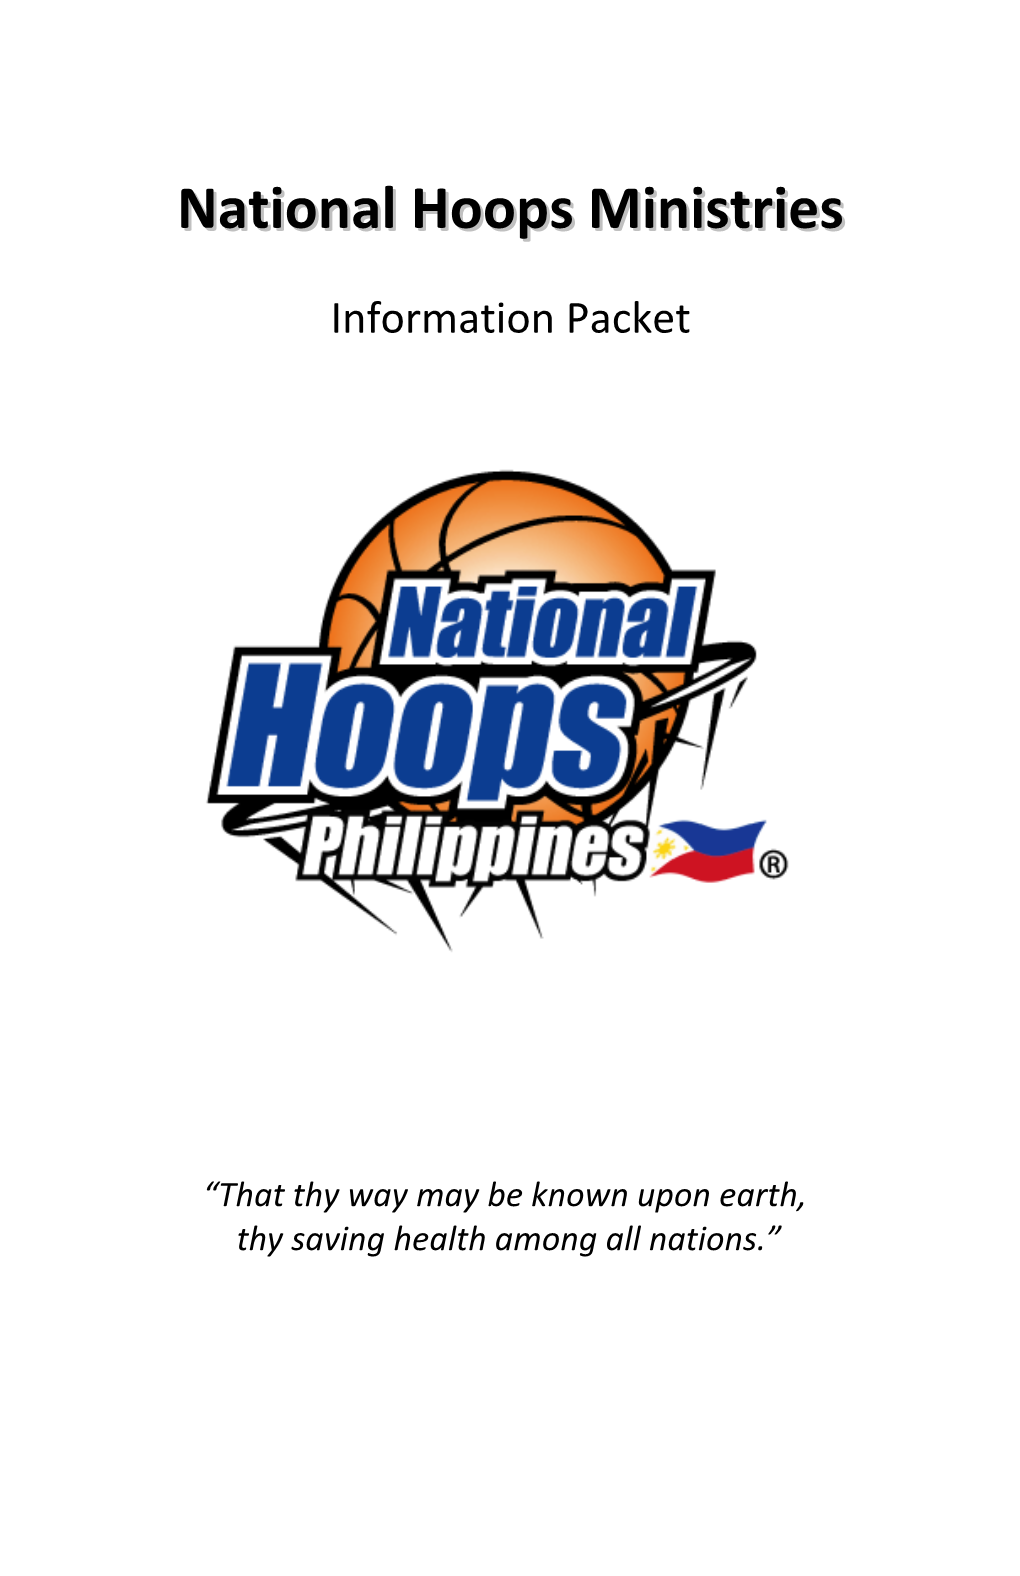 National Hoops Ministries